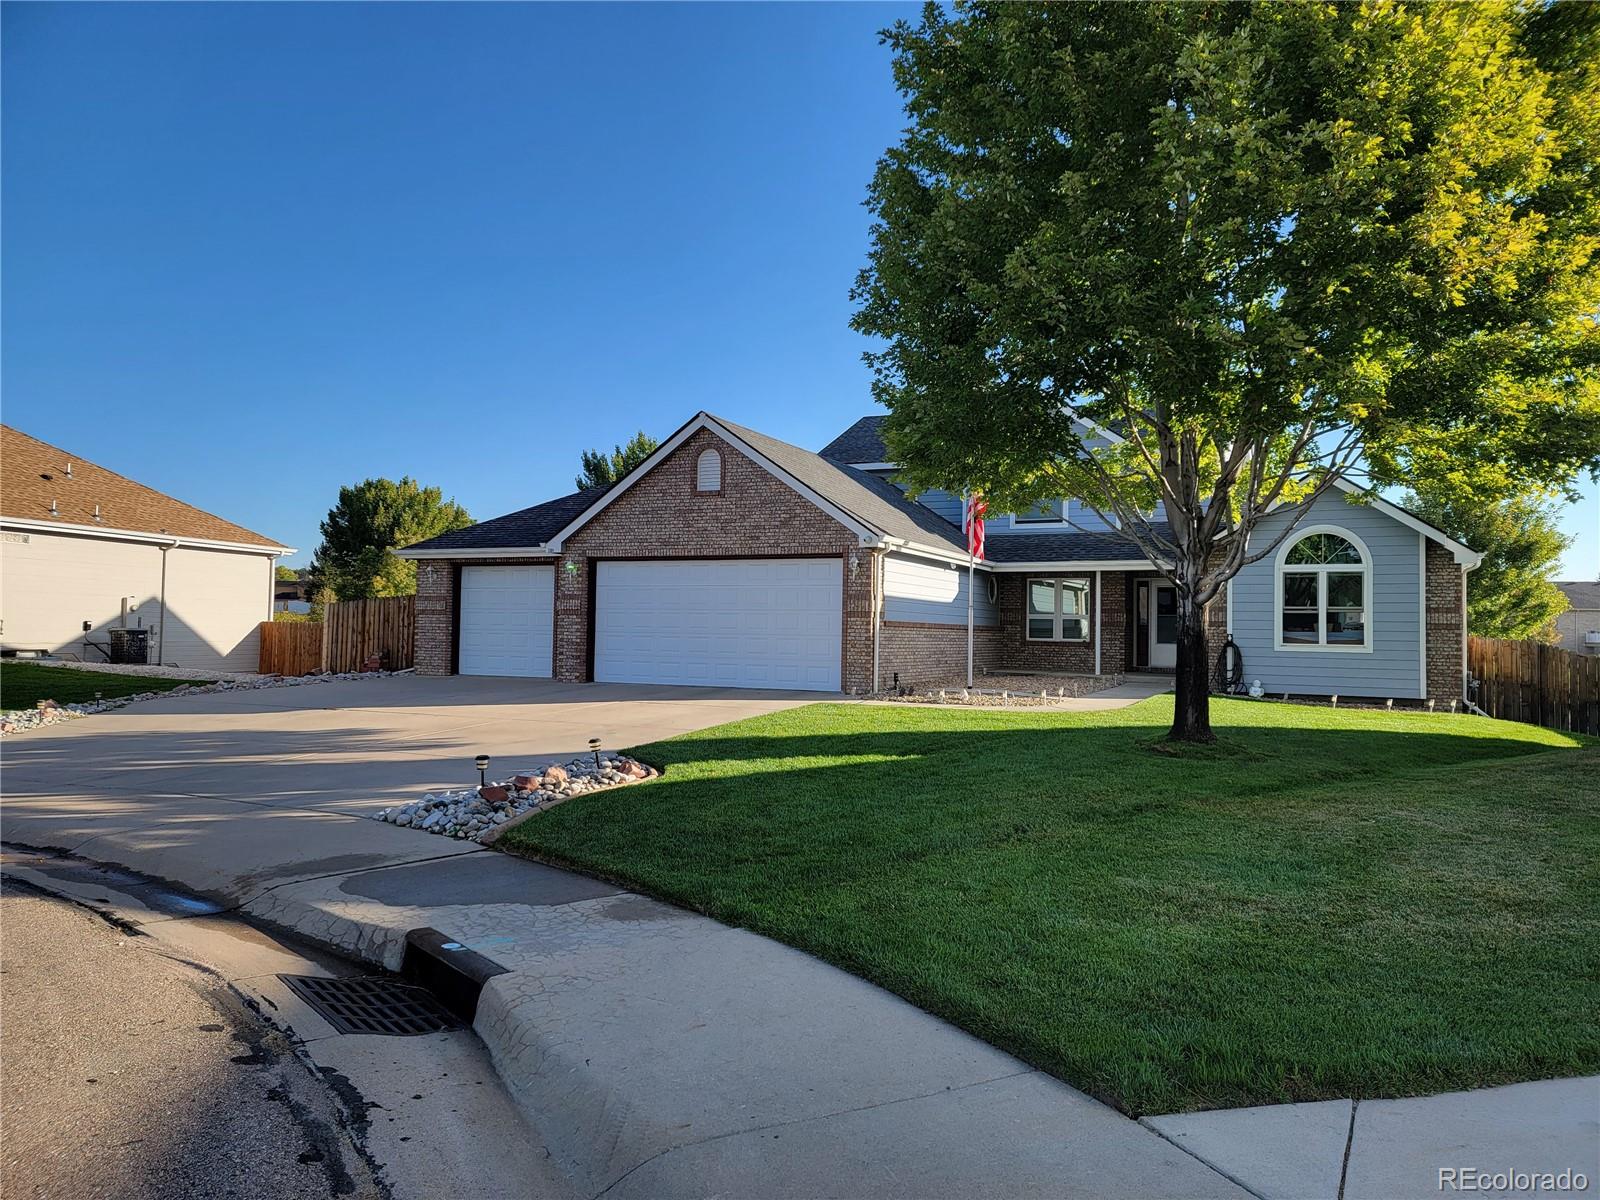 3104  55th avenue, Greeley sold home. Closed on 2024-04-05 for $566,255.